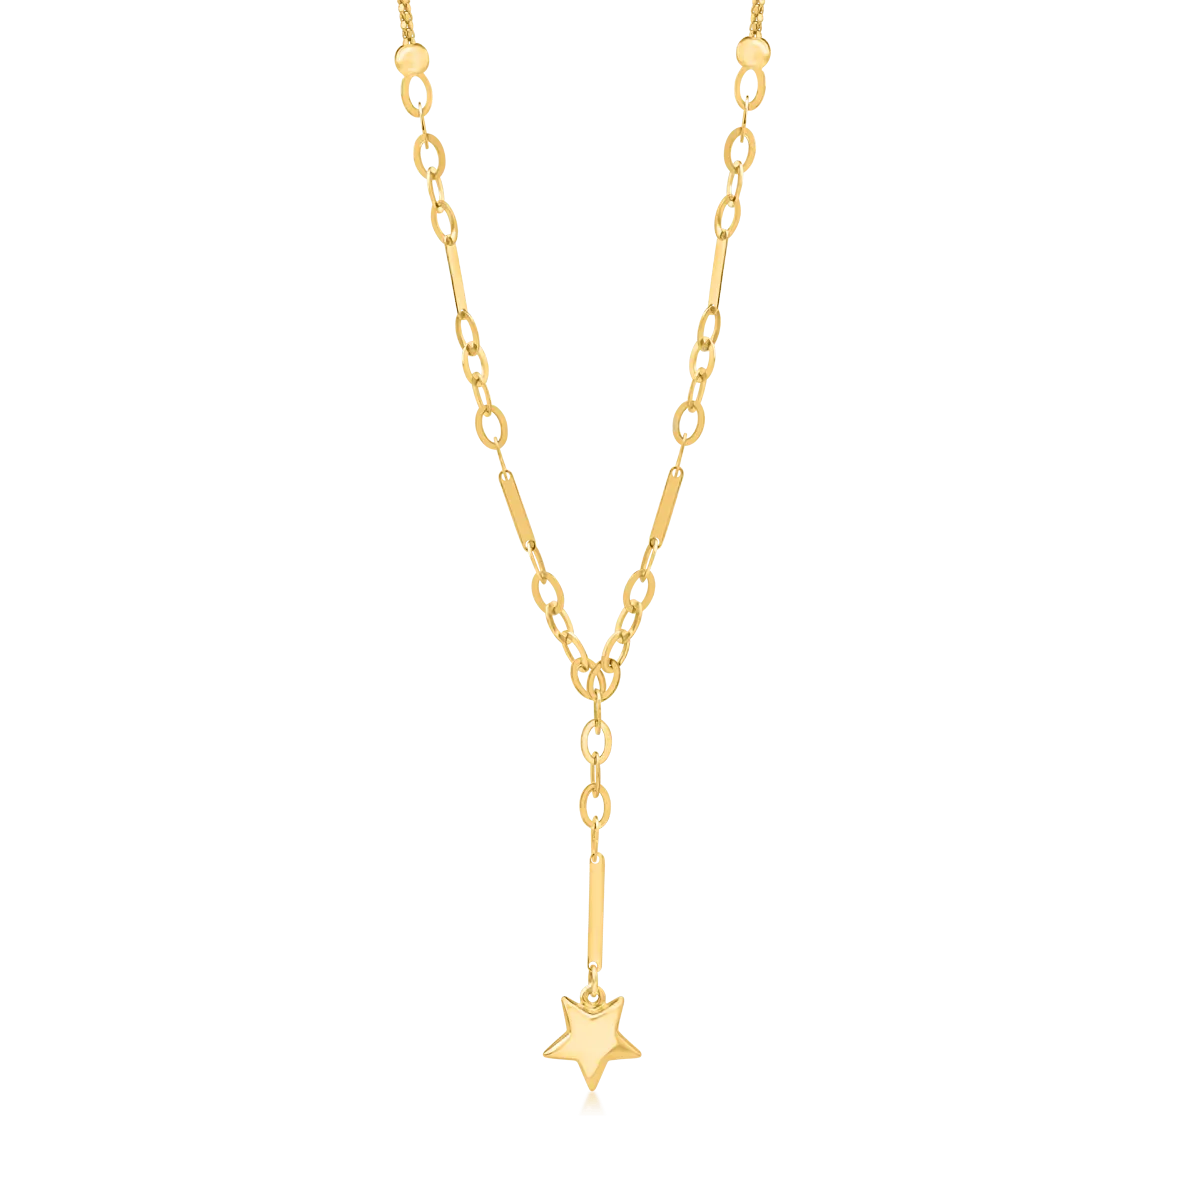 14K yellow gold star pendant necklace